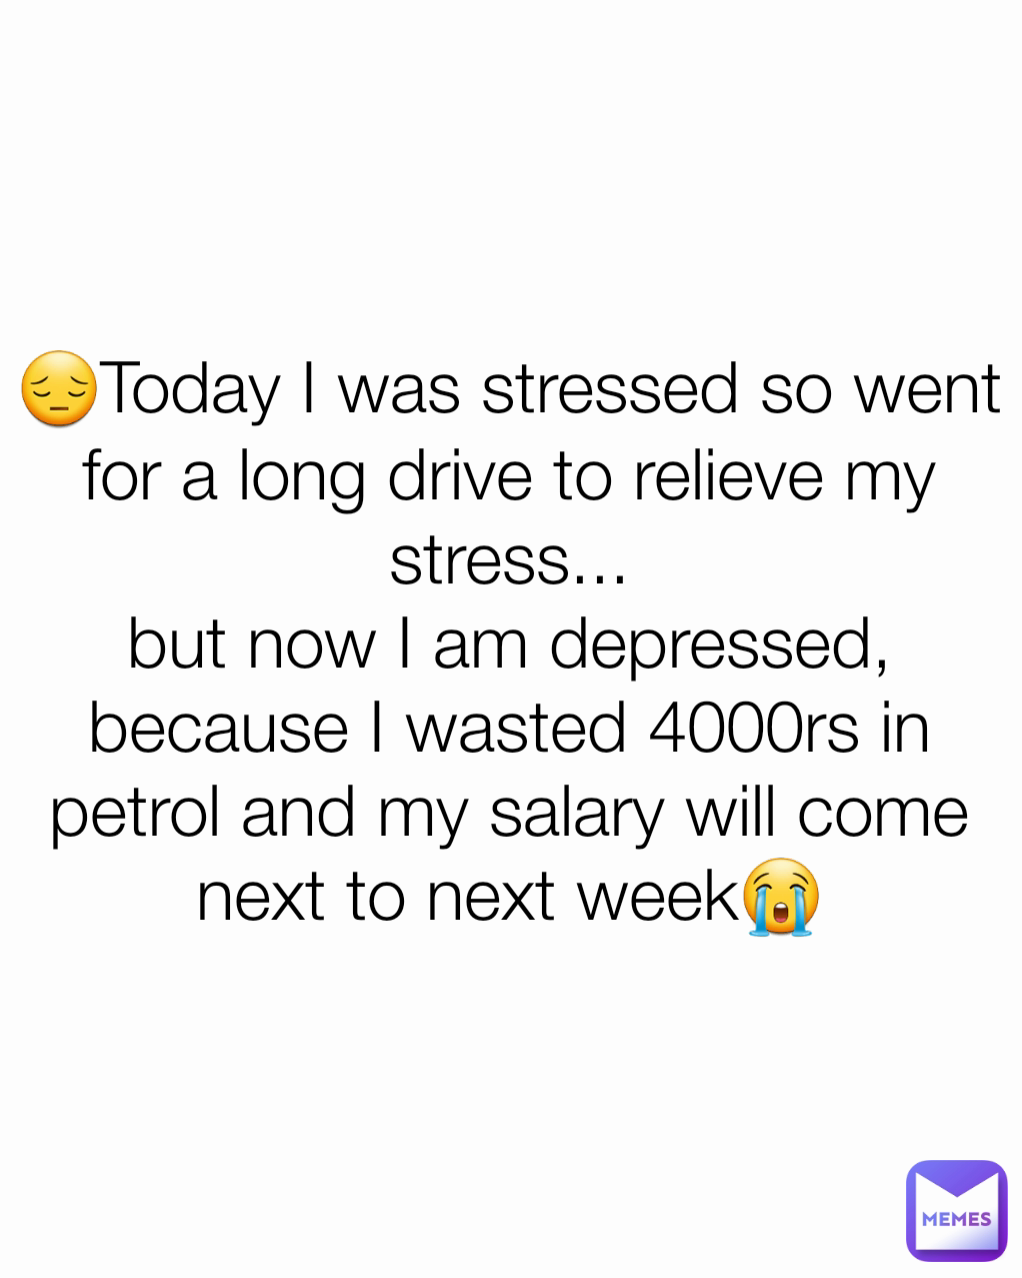 😔Today I was stressed so went for a long drive to relieve my stress...
but now I am depressed, because I wasted 4000rs in petrol and my salary will come next to next week😭